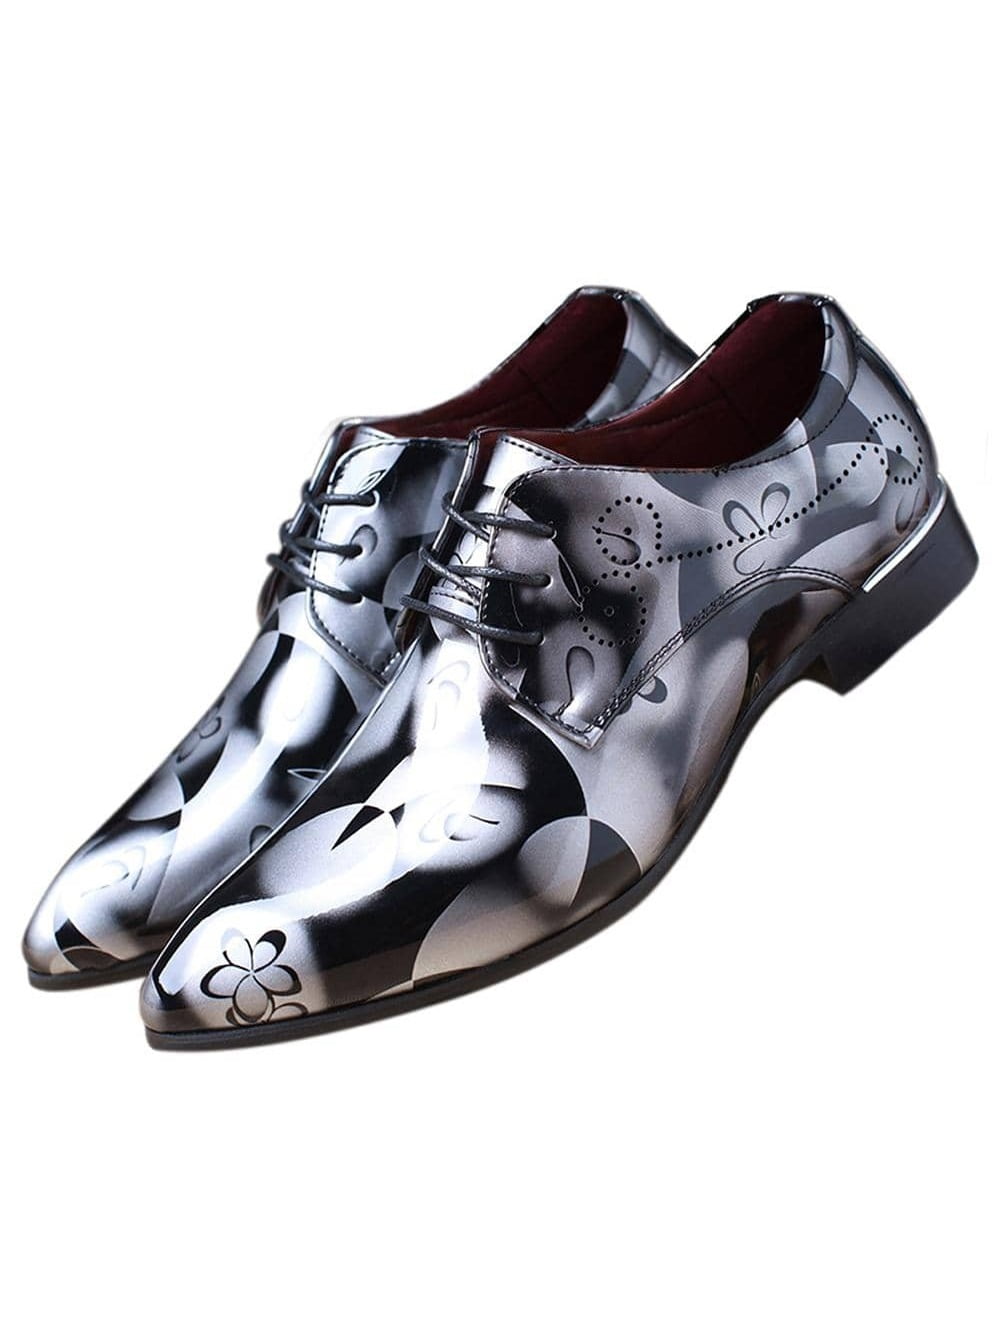 Men Dress Shoes Lace Up Oxford Shoes Pointed Toe Floral Patent Leather ...